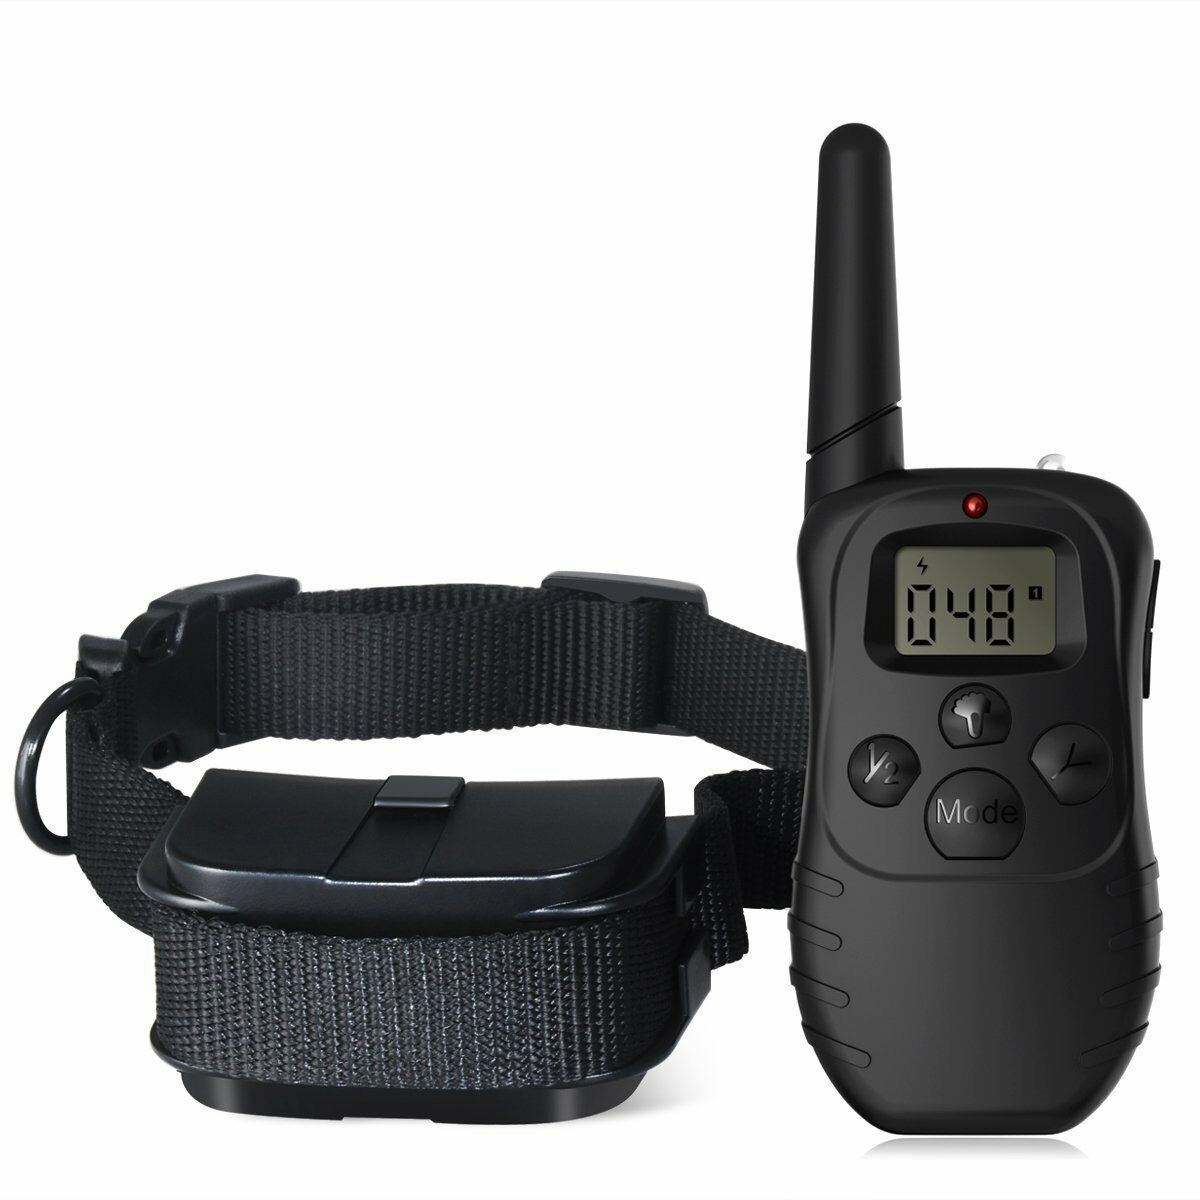 Remote LCD 100LV 300M Electric Shock Vibrate Pet Dog Training Collar Waterproof